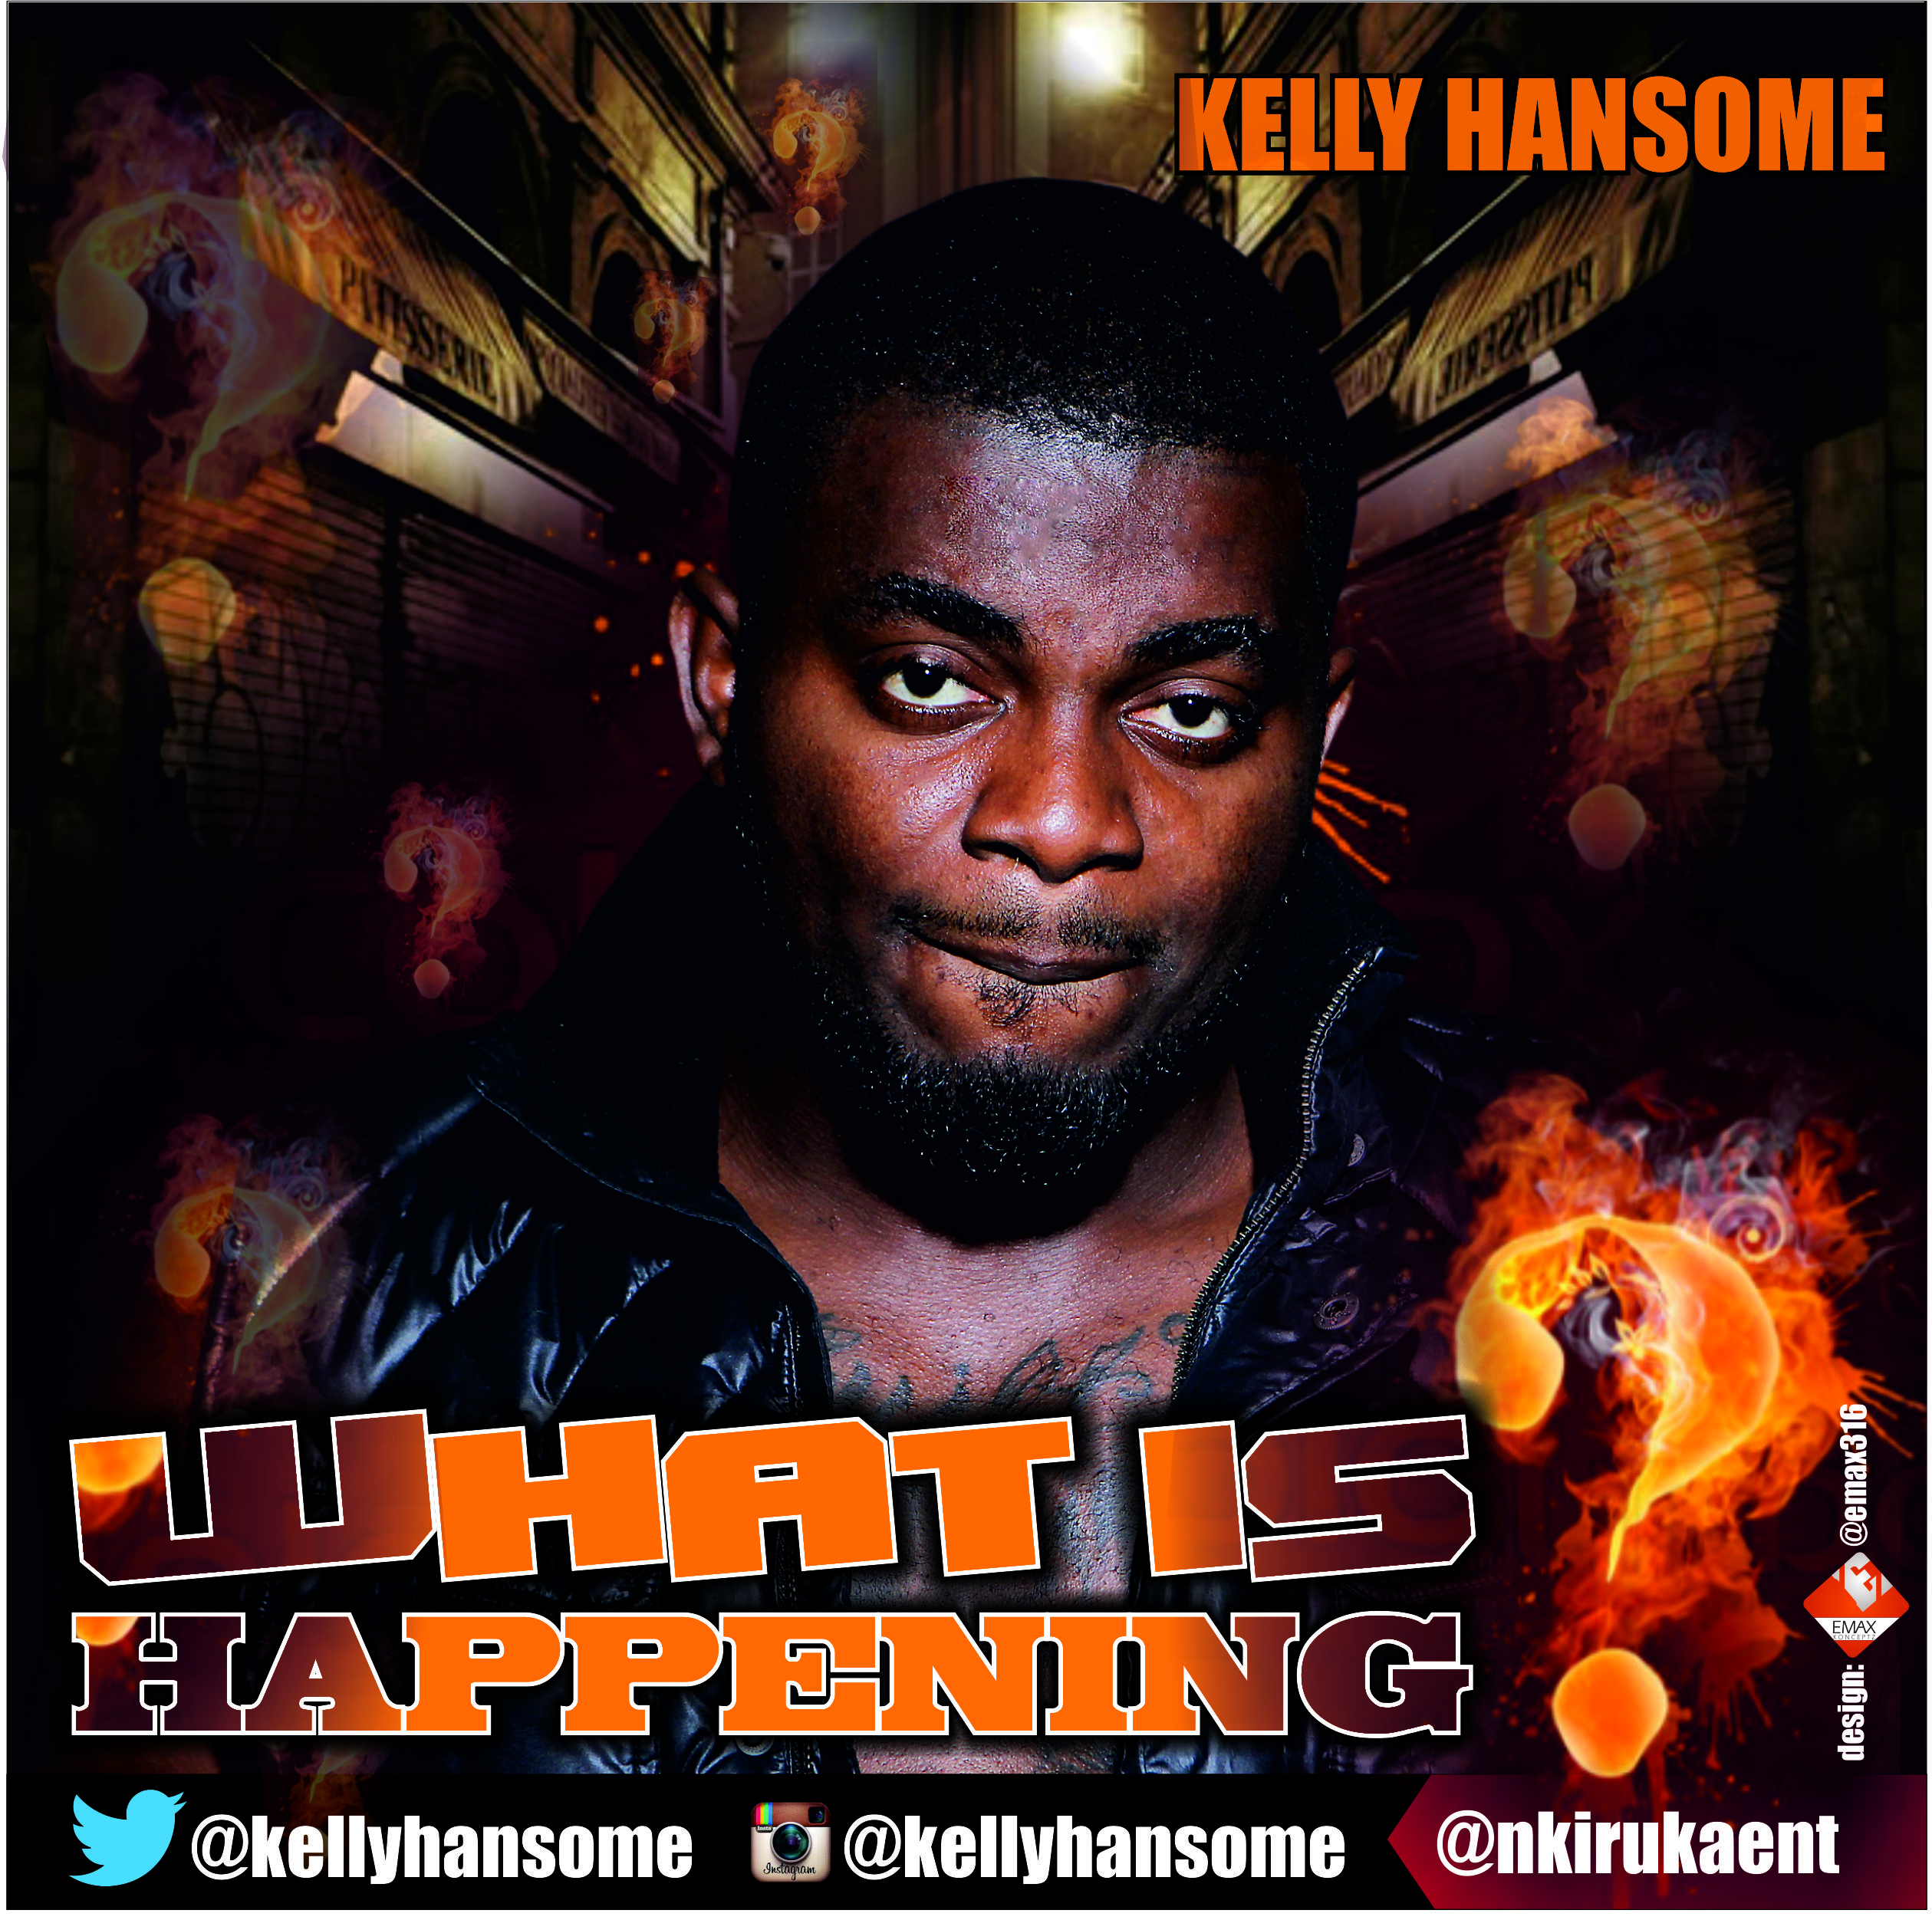 Kelly Hansome what is happening cover art